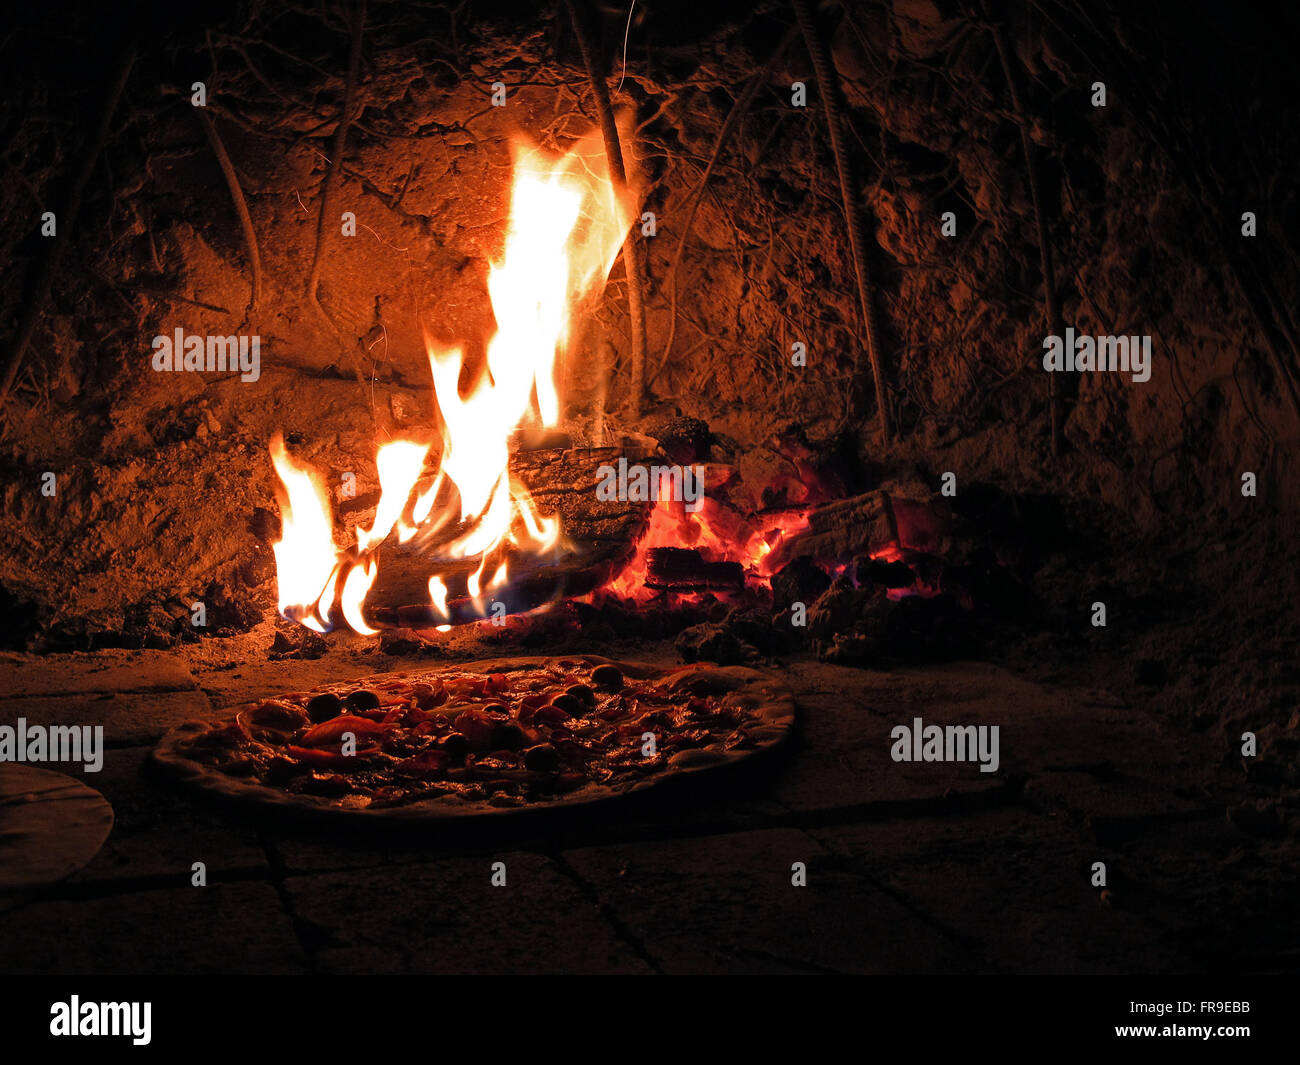 Pizza being baked in an oven made of clay mound according to local tradition Stock Photo